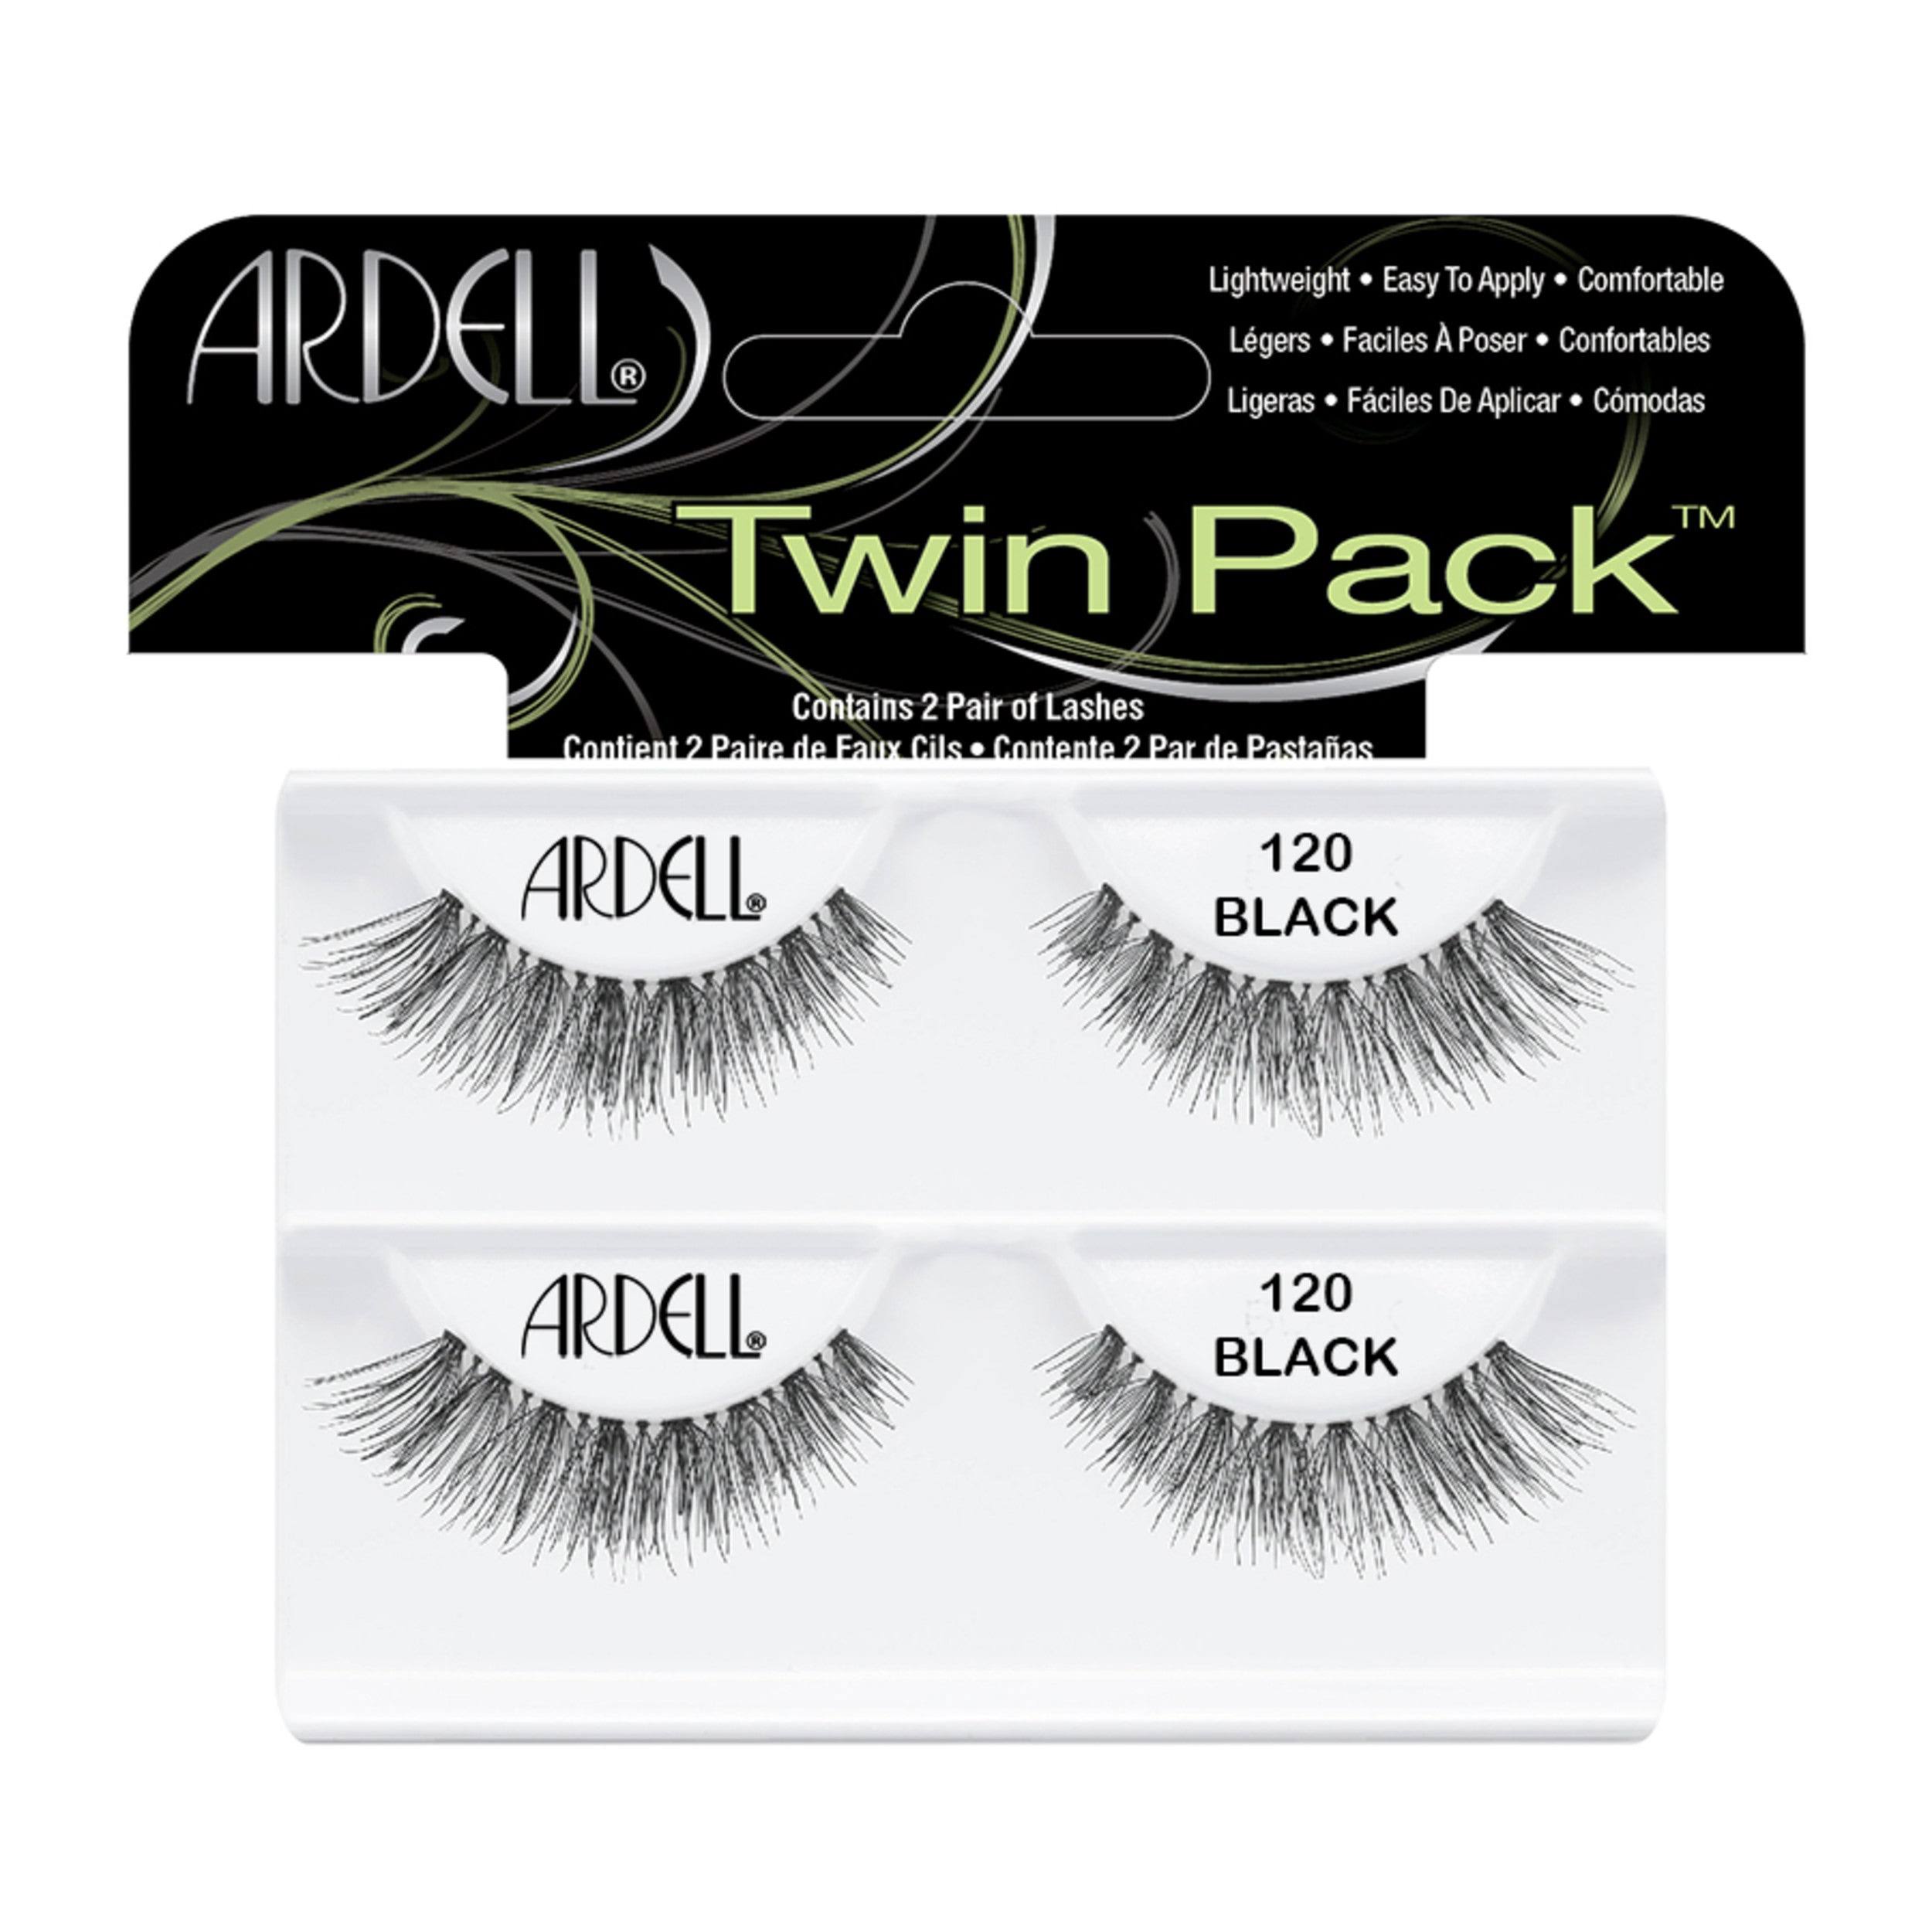 Ardell Twin Pack Lashes - 120